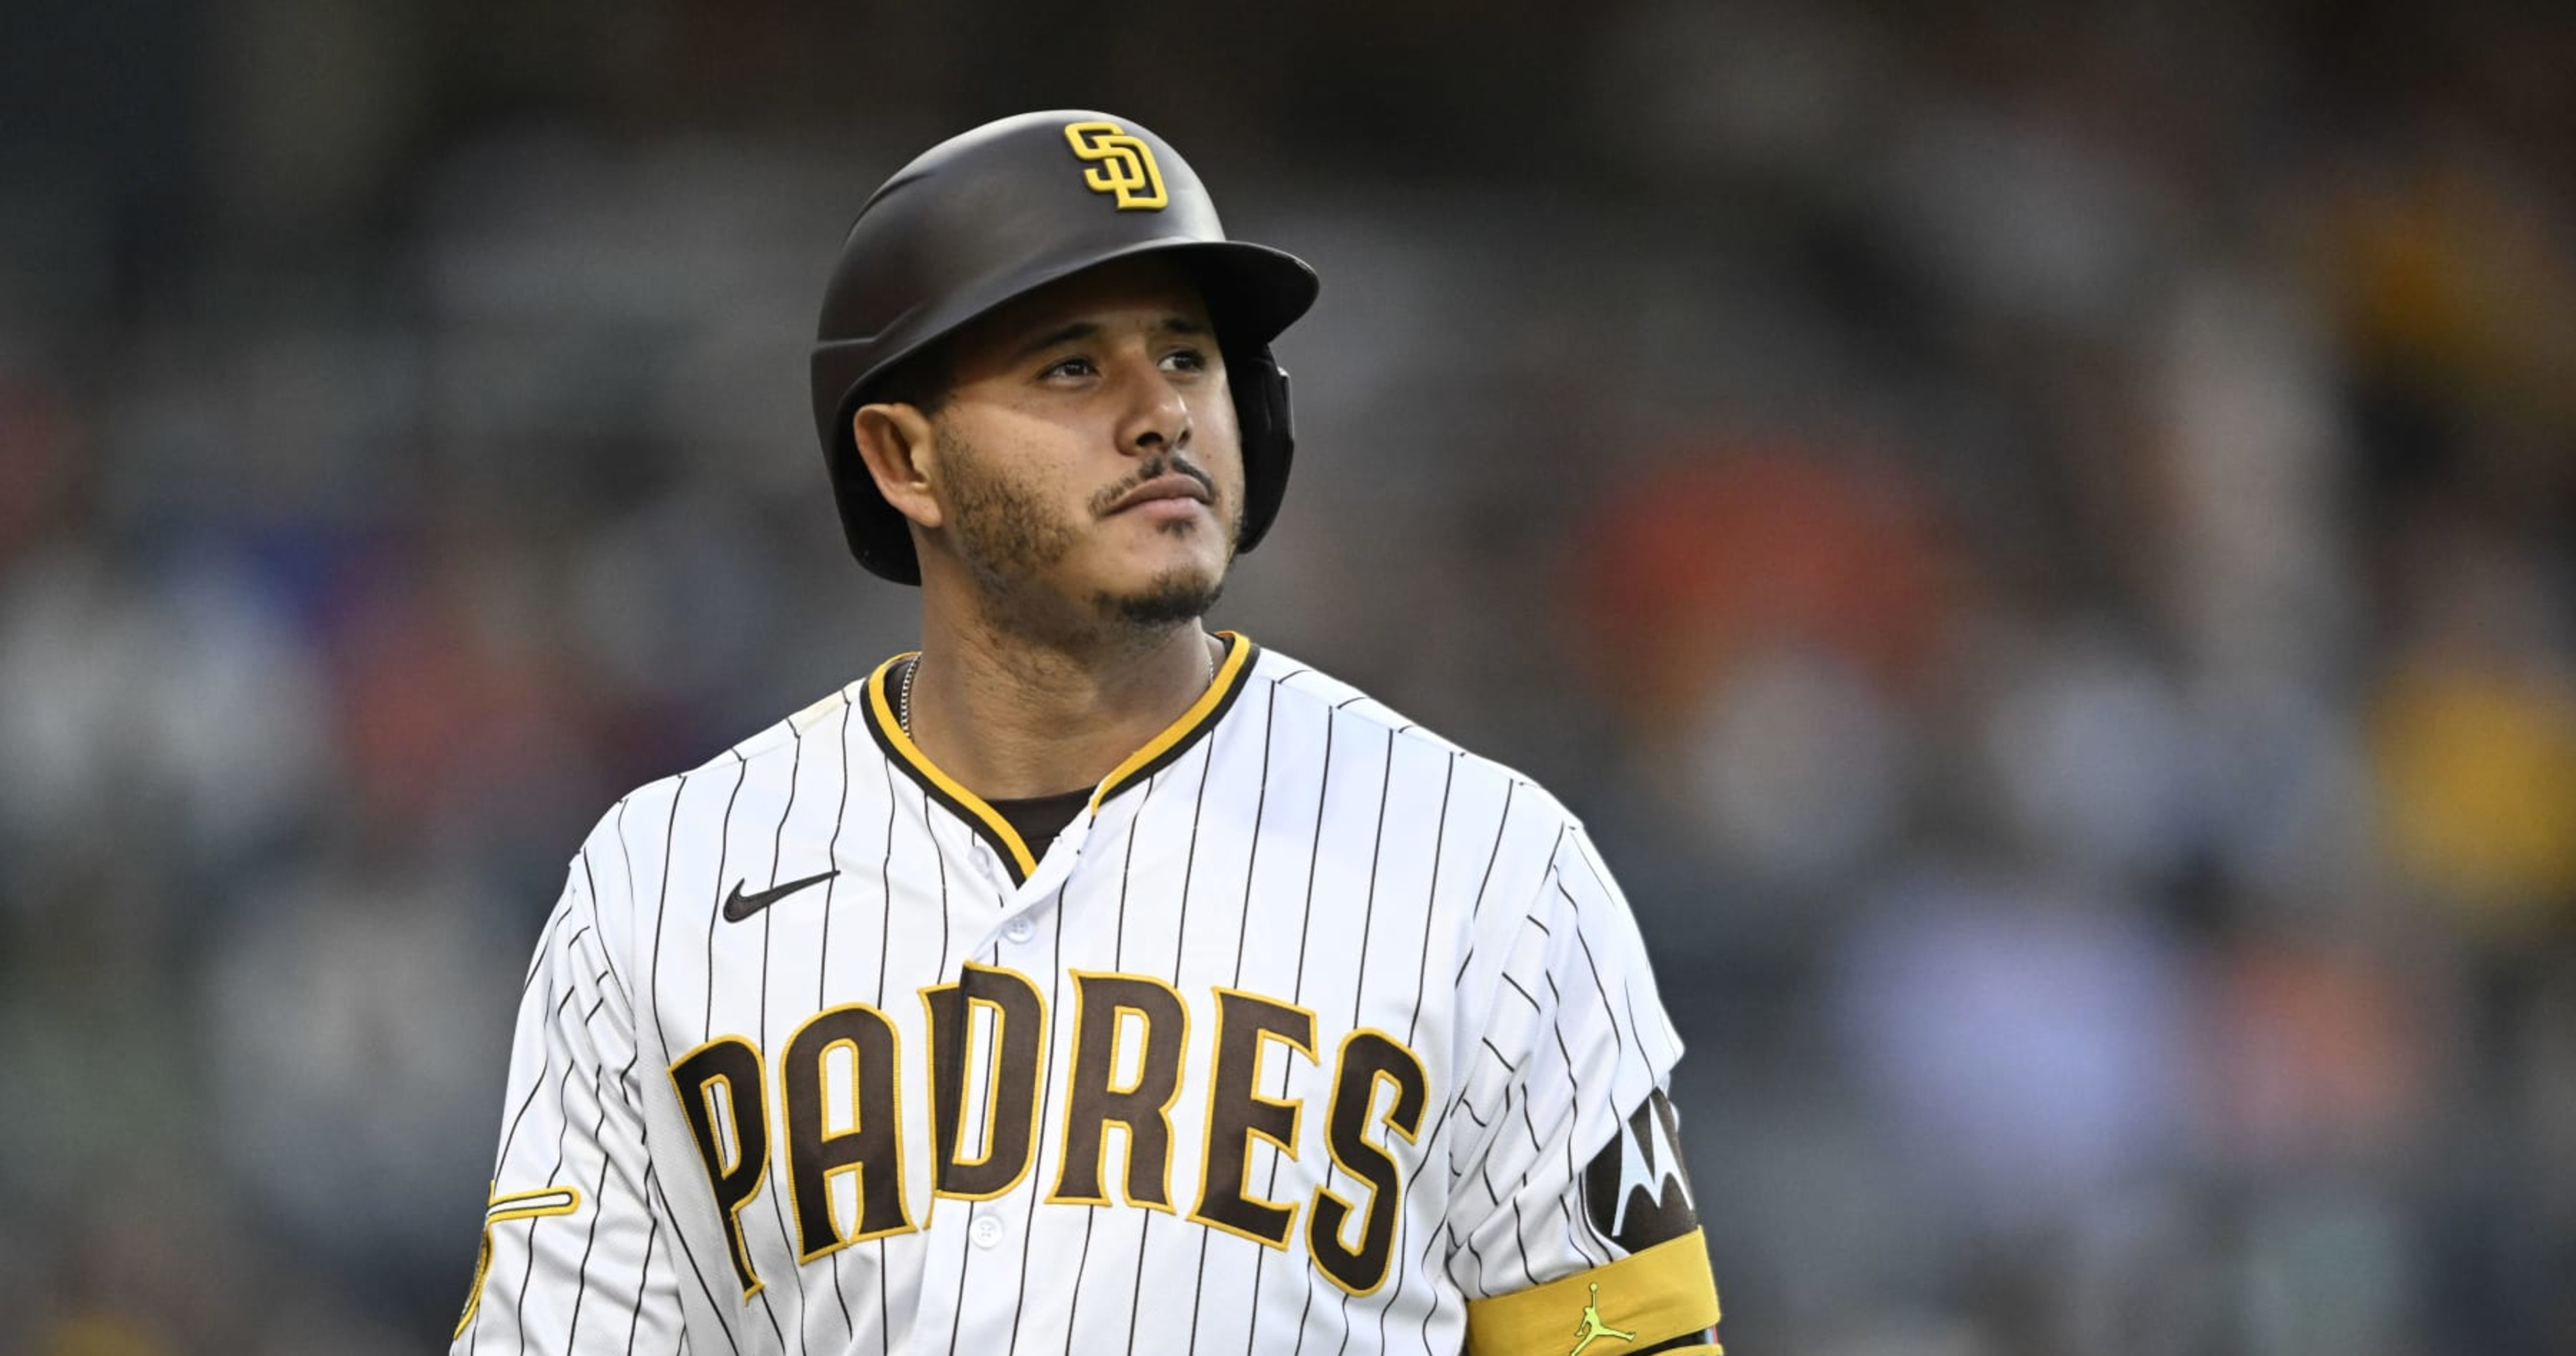 Manny Machado's Padres contract is not as burdensome as it seems